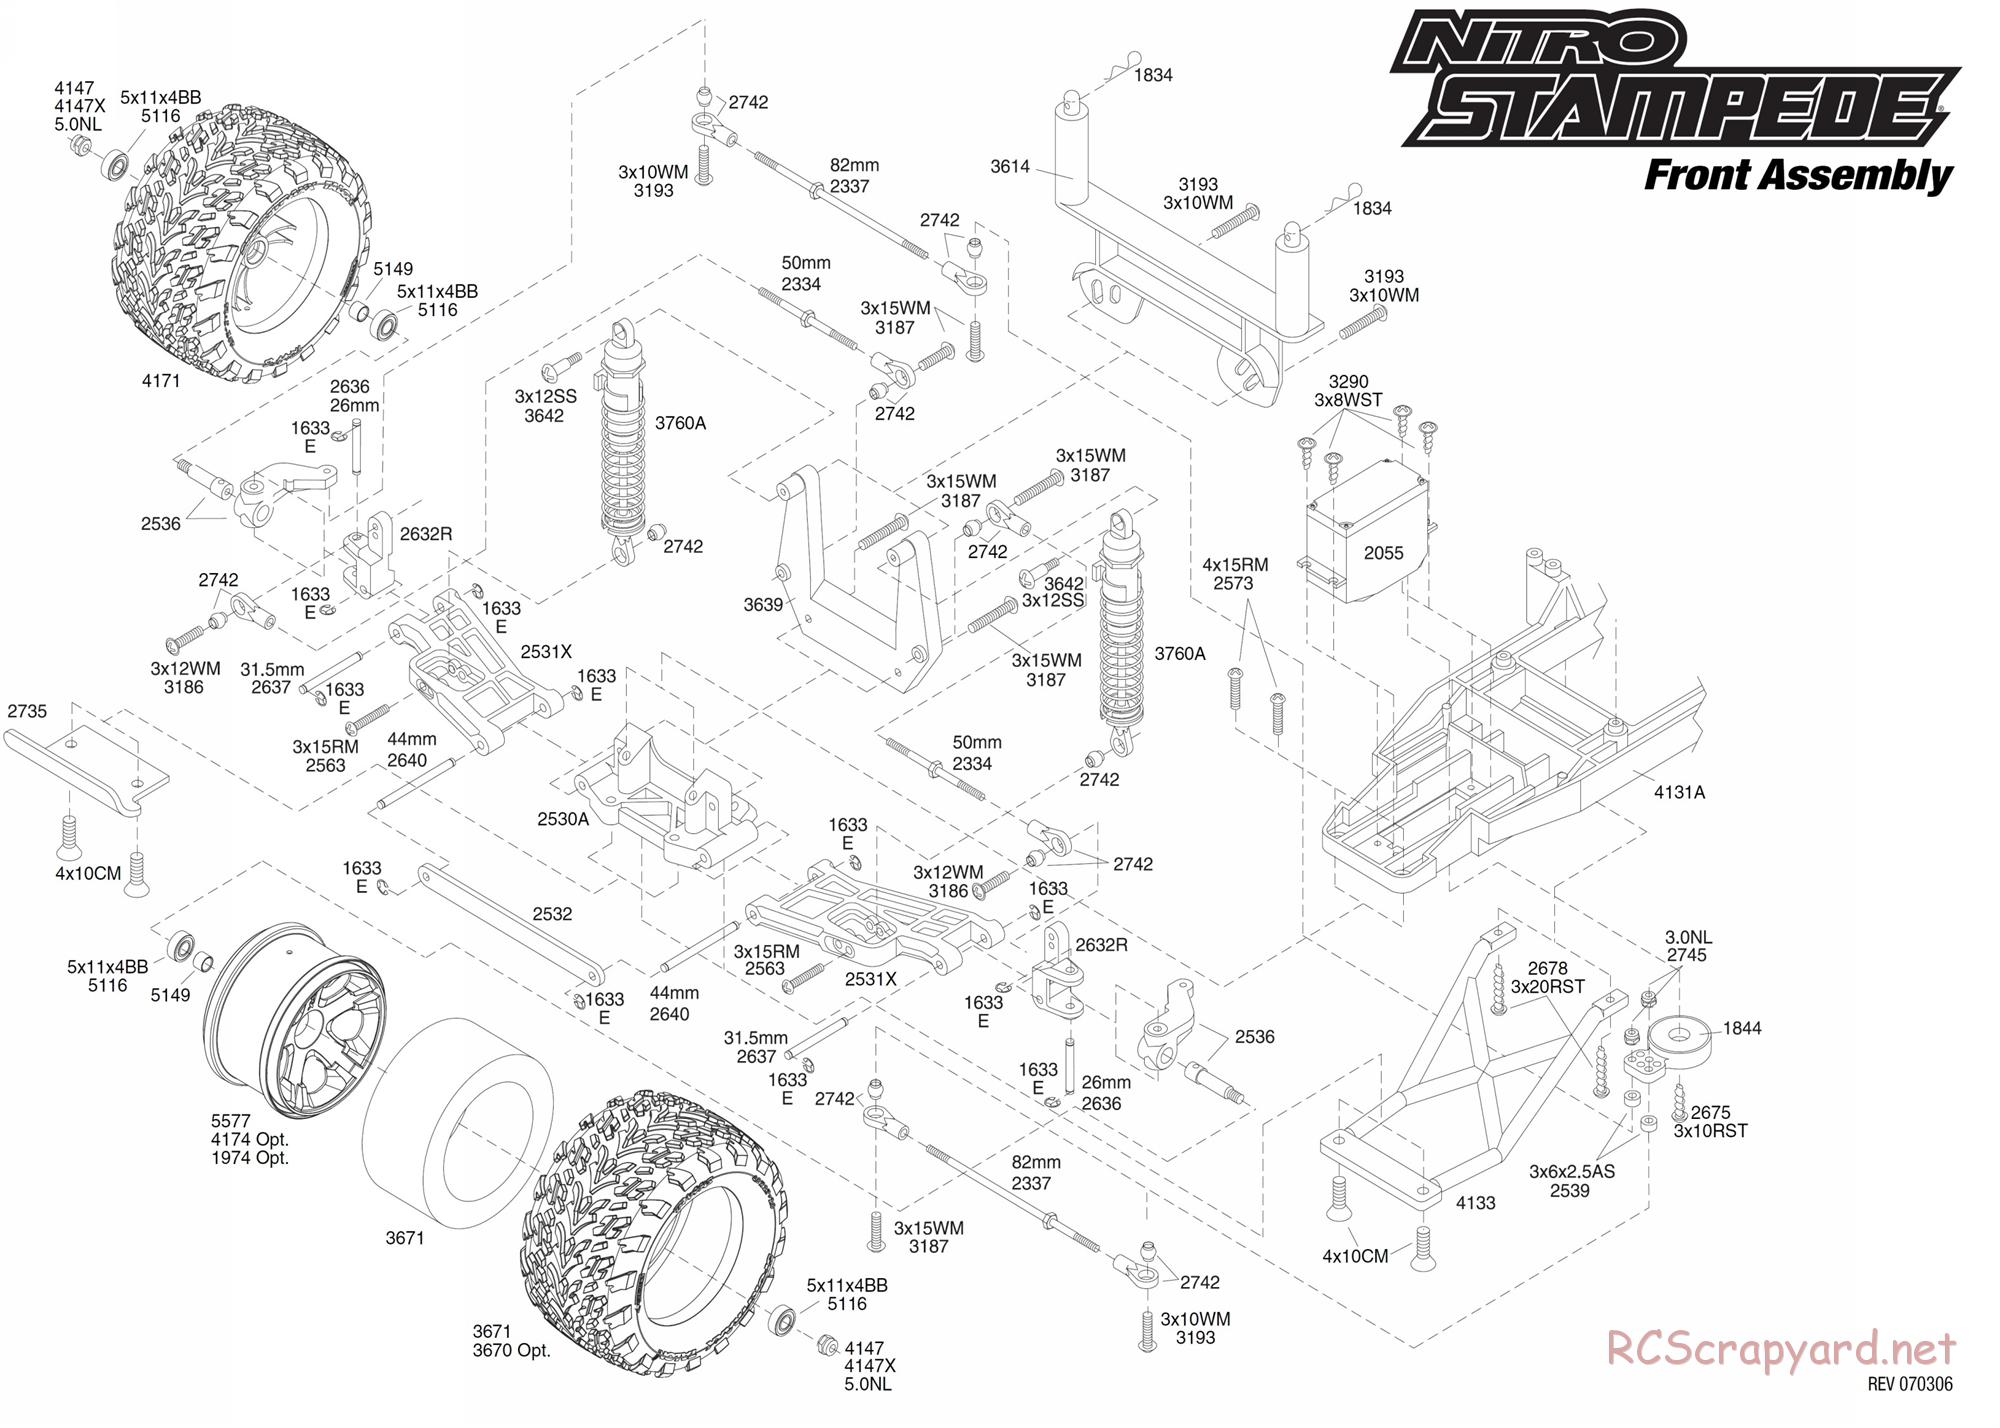 Traxxas - Nitro Stampede (2007) - Exploded Views - Page 2